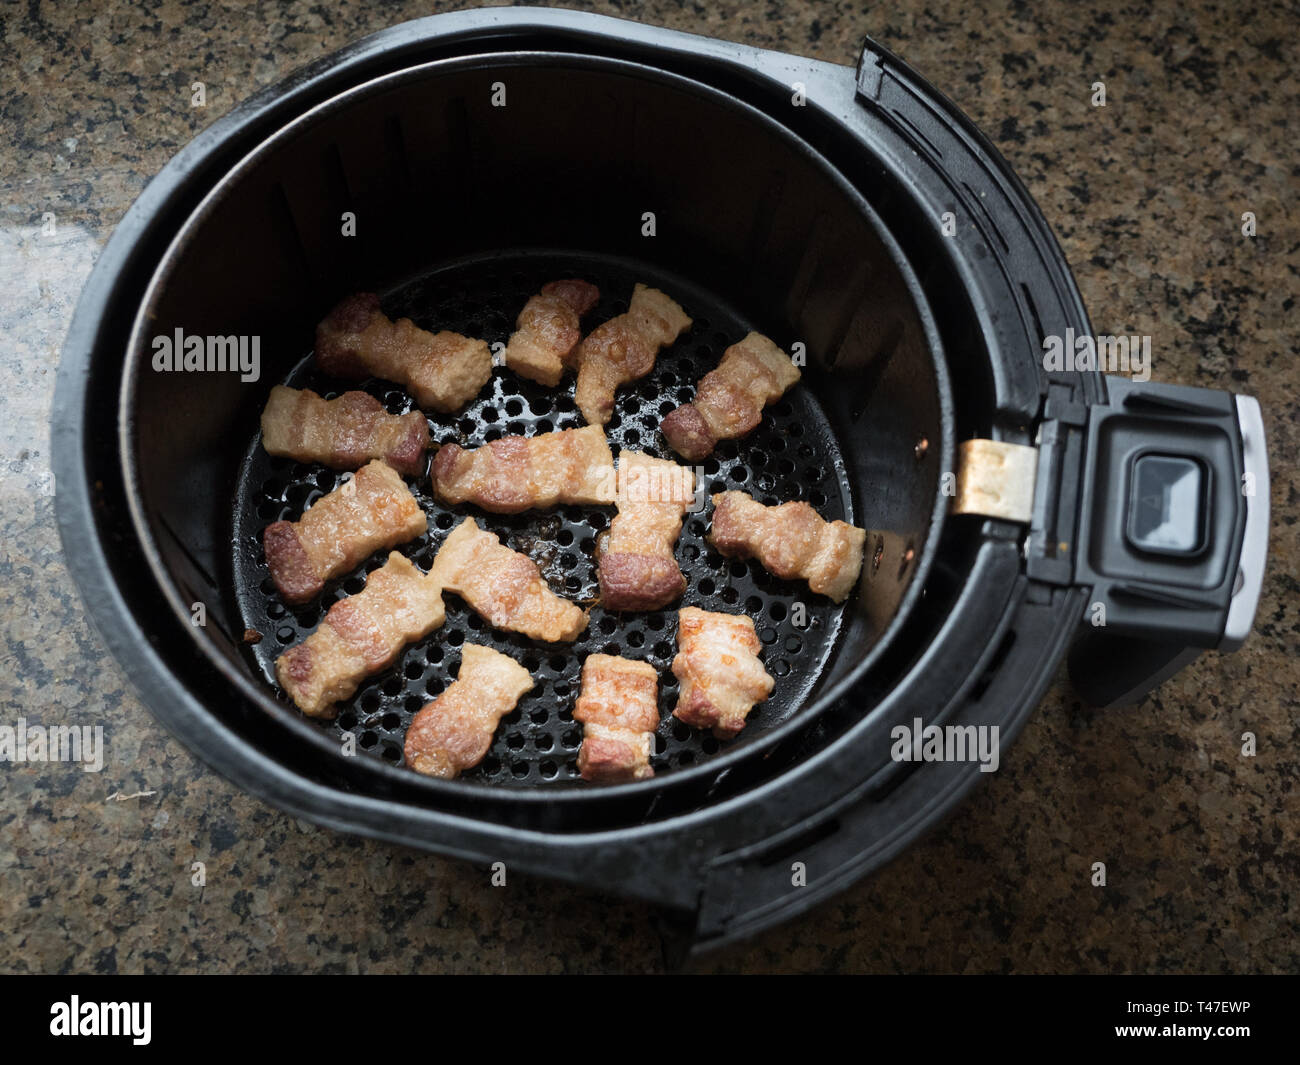 Pork Belly cooking in an air fryer basket Stock Photo